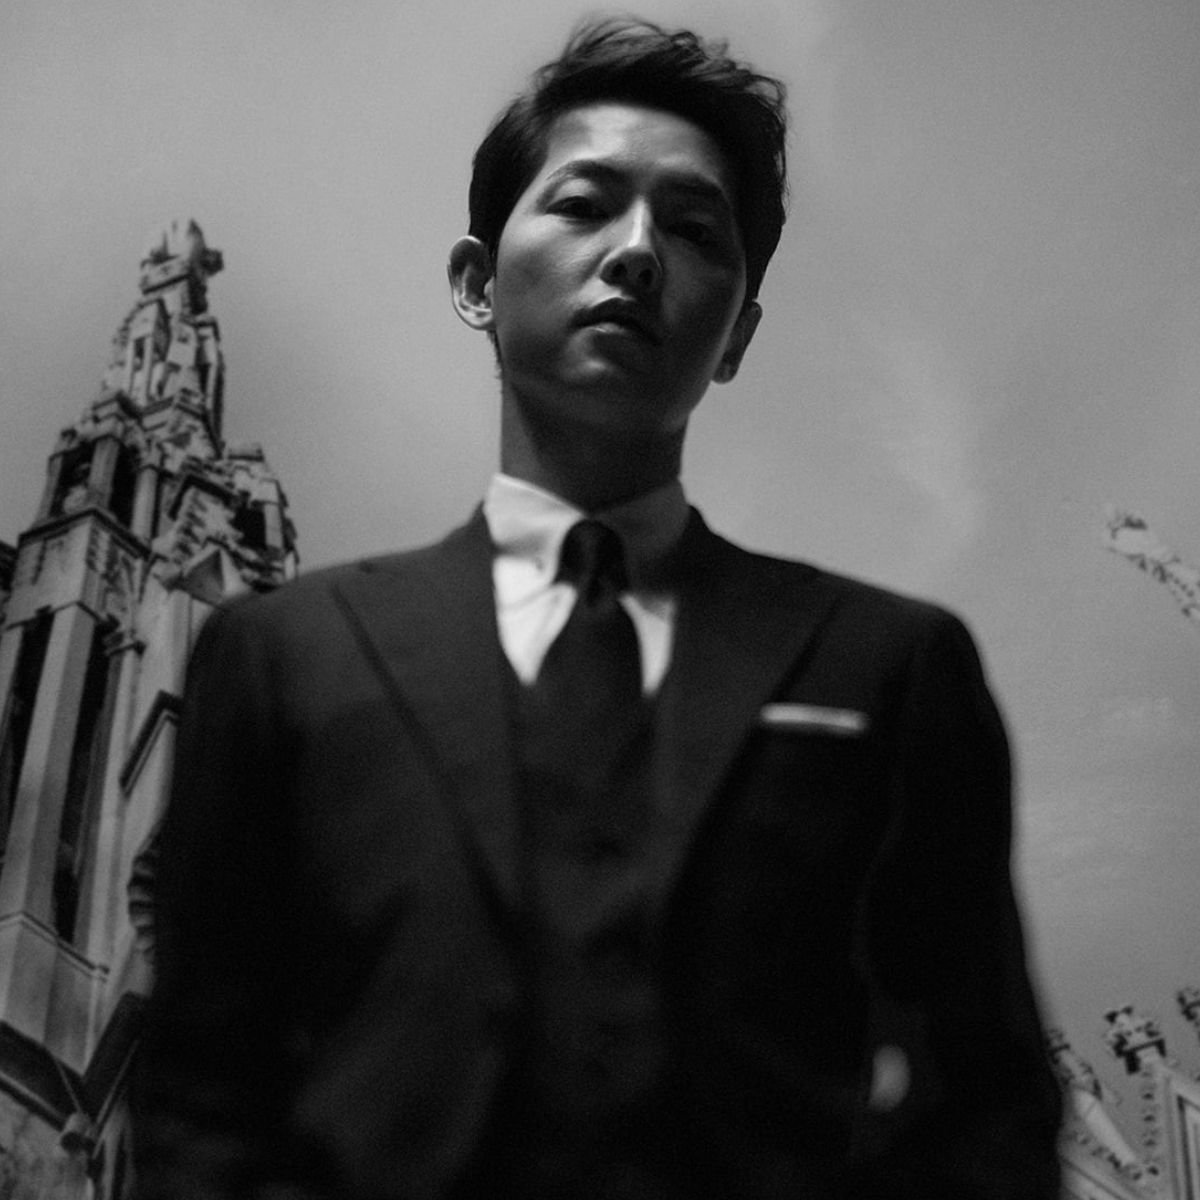 Song Joong Ki is an intimidating presence in the intriguing black and white poster of Vincenzo